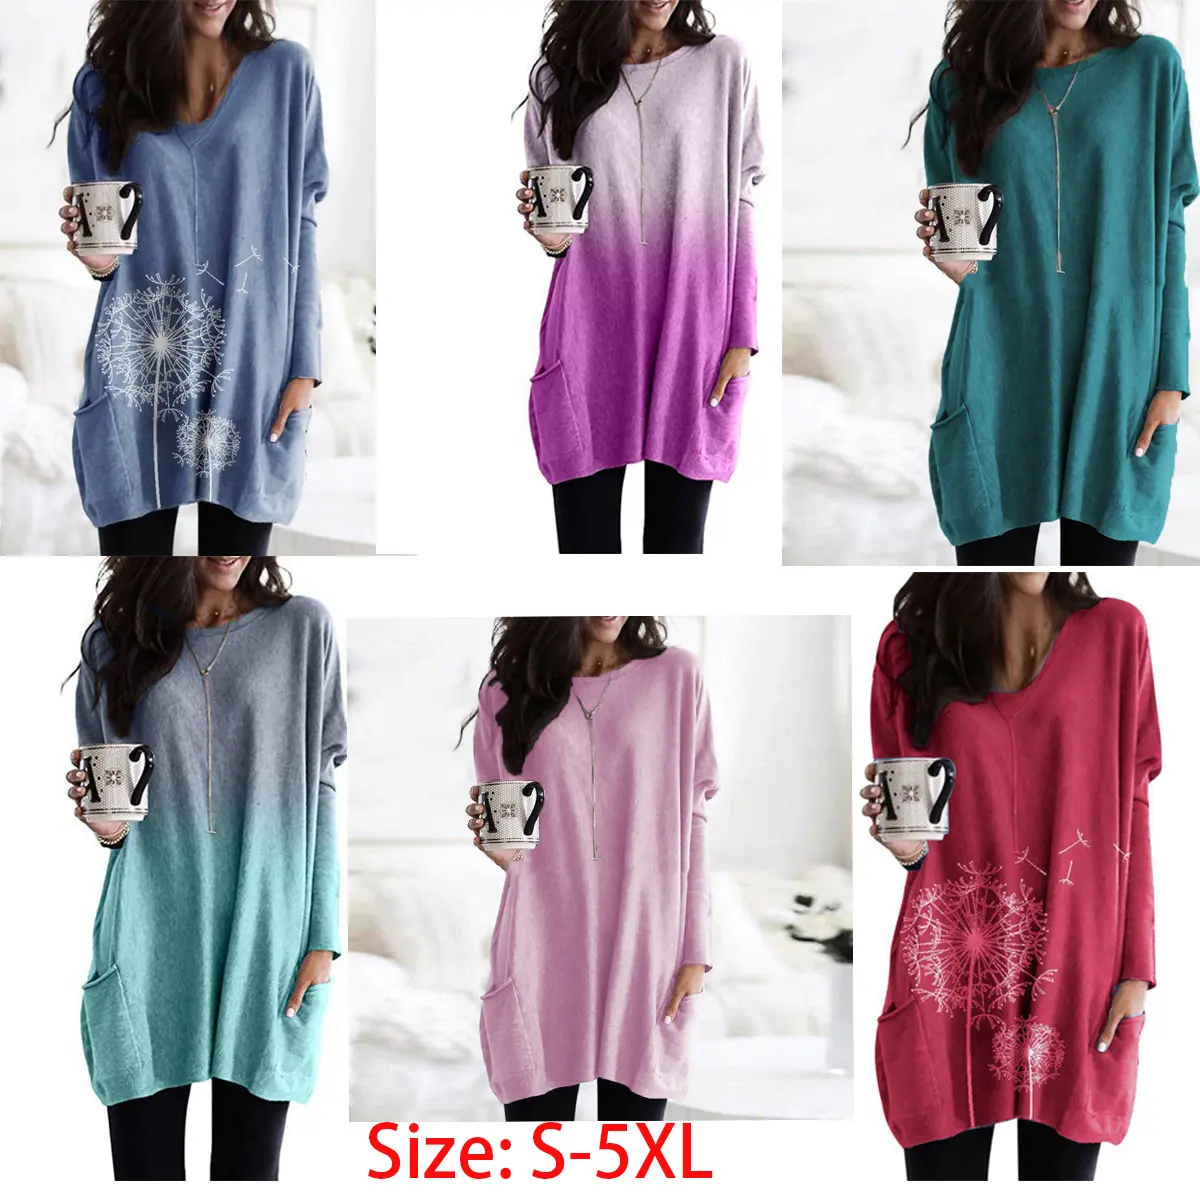 Women gradient color Casual Long Sleeve T-shirt Loose Fit Knit Tops Tunic Blouses